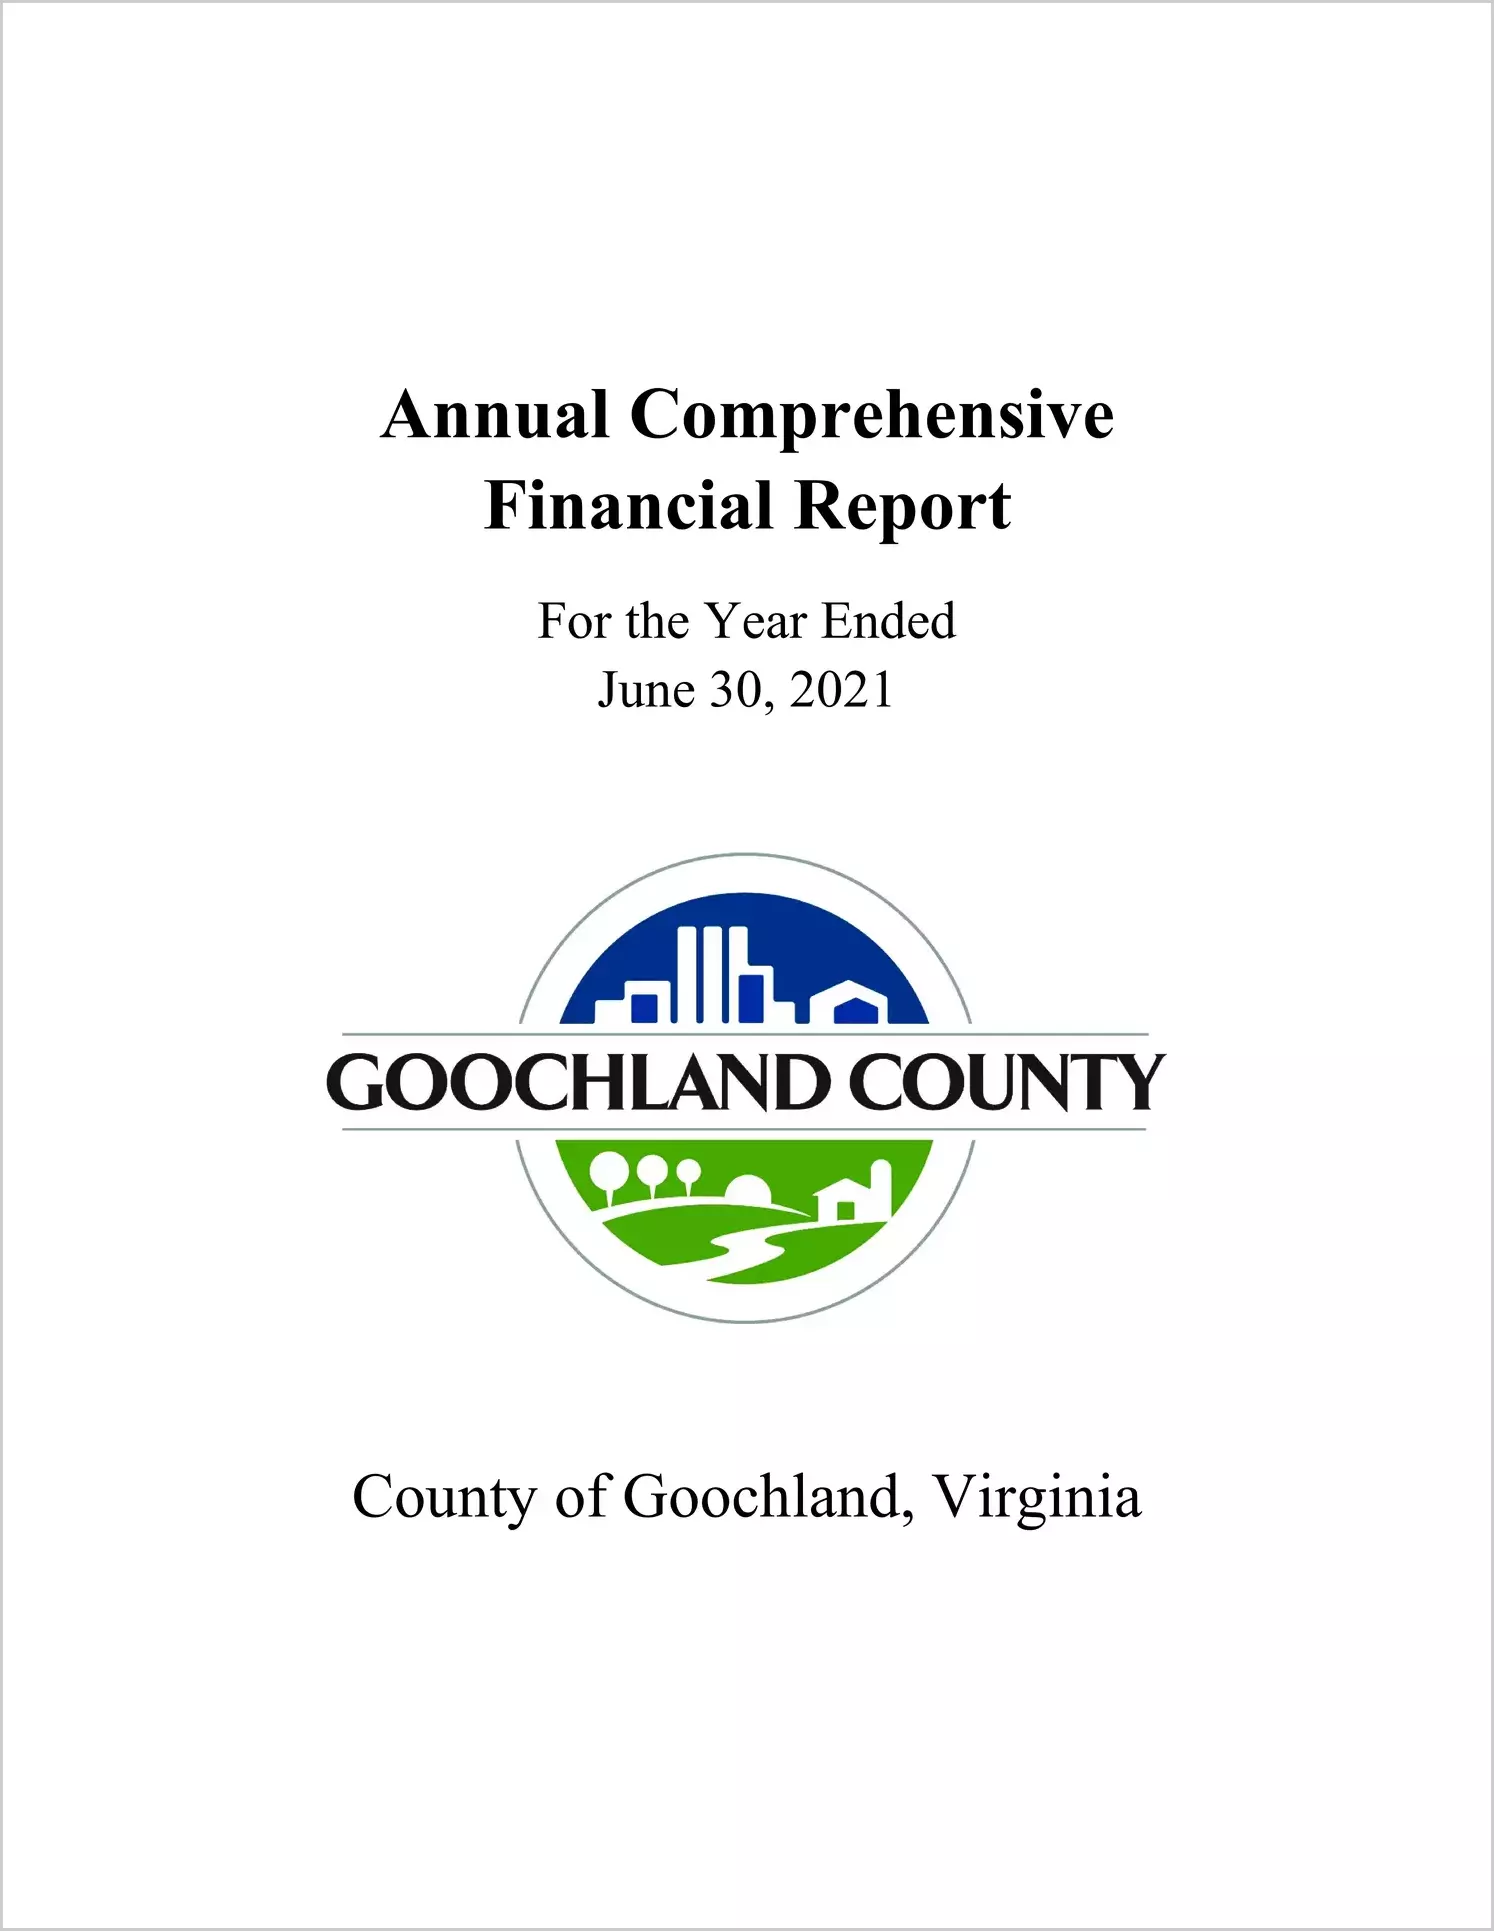 2021 Annual Financial Report for County of Goochland